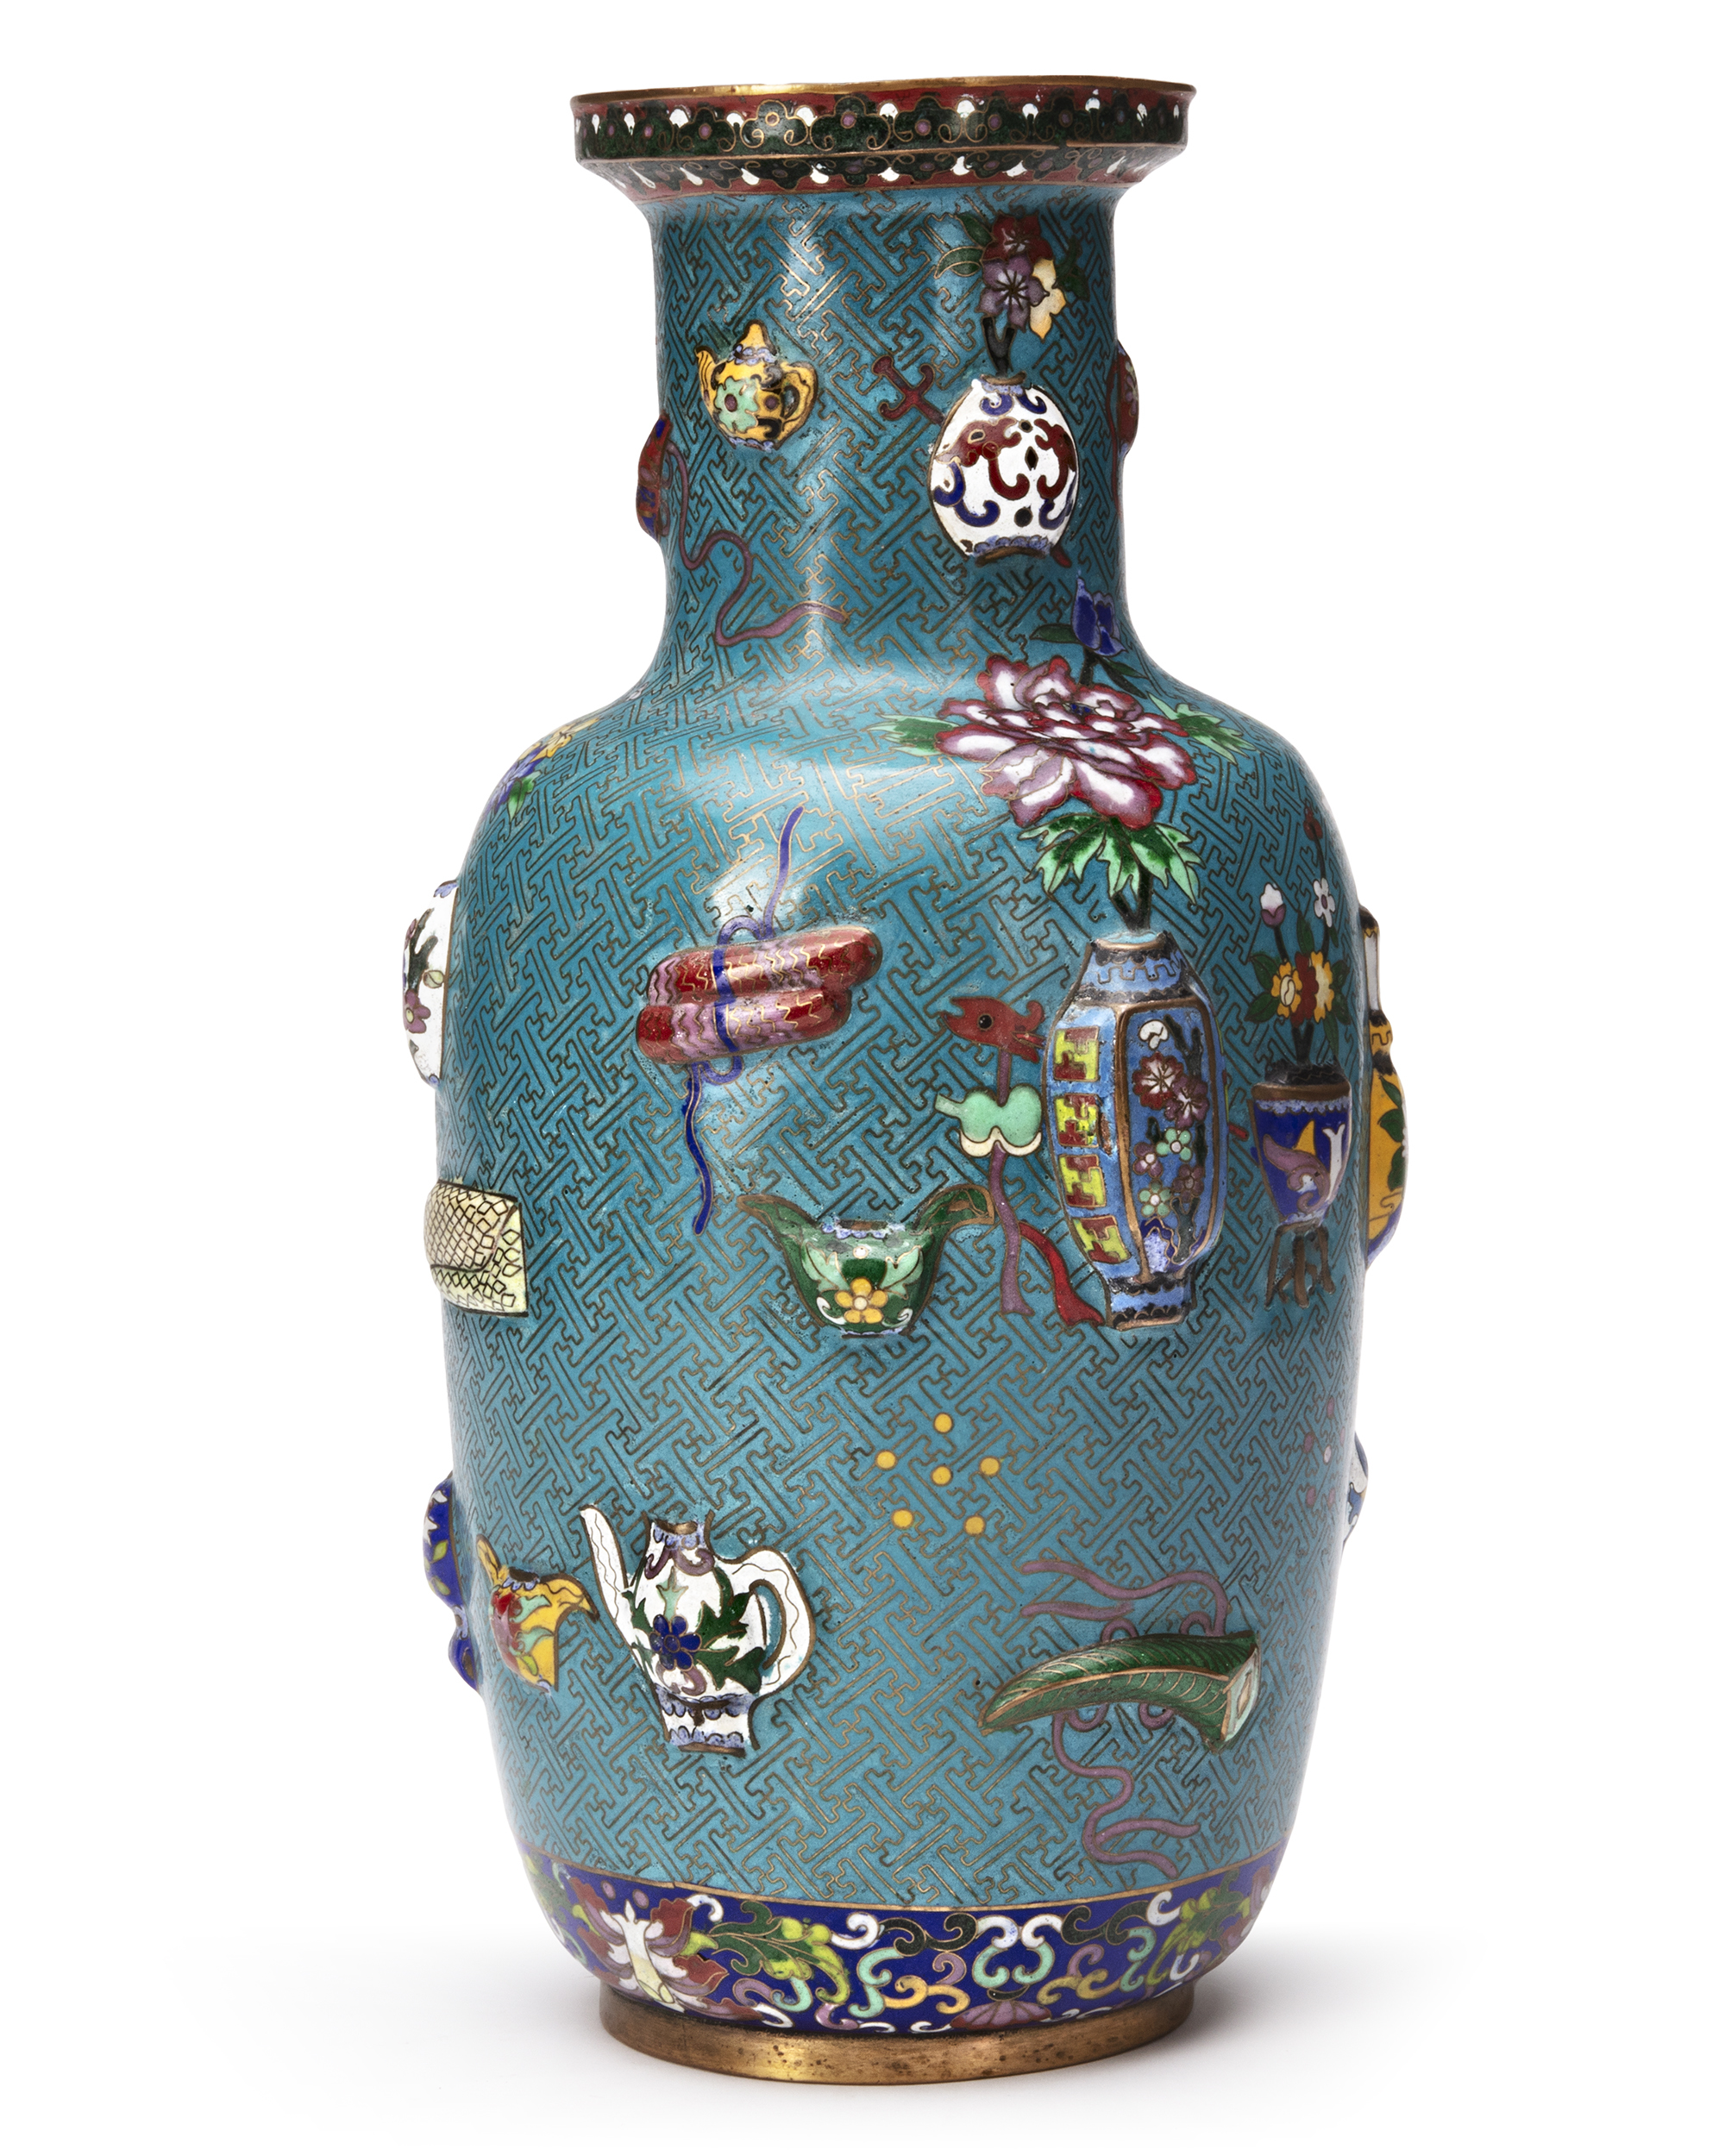 A CHINESE CLOISONNE ENAMEL VASE, 19TH/20TH CENTURY - Image 2 of 5